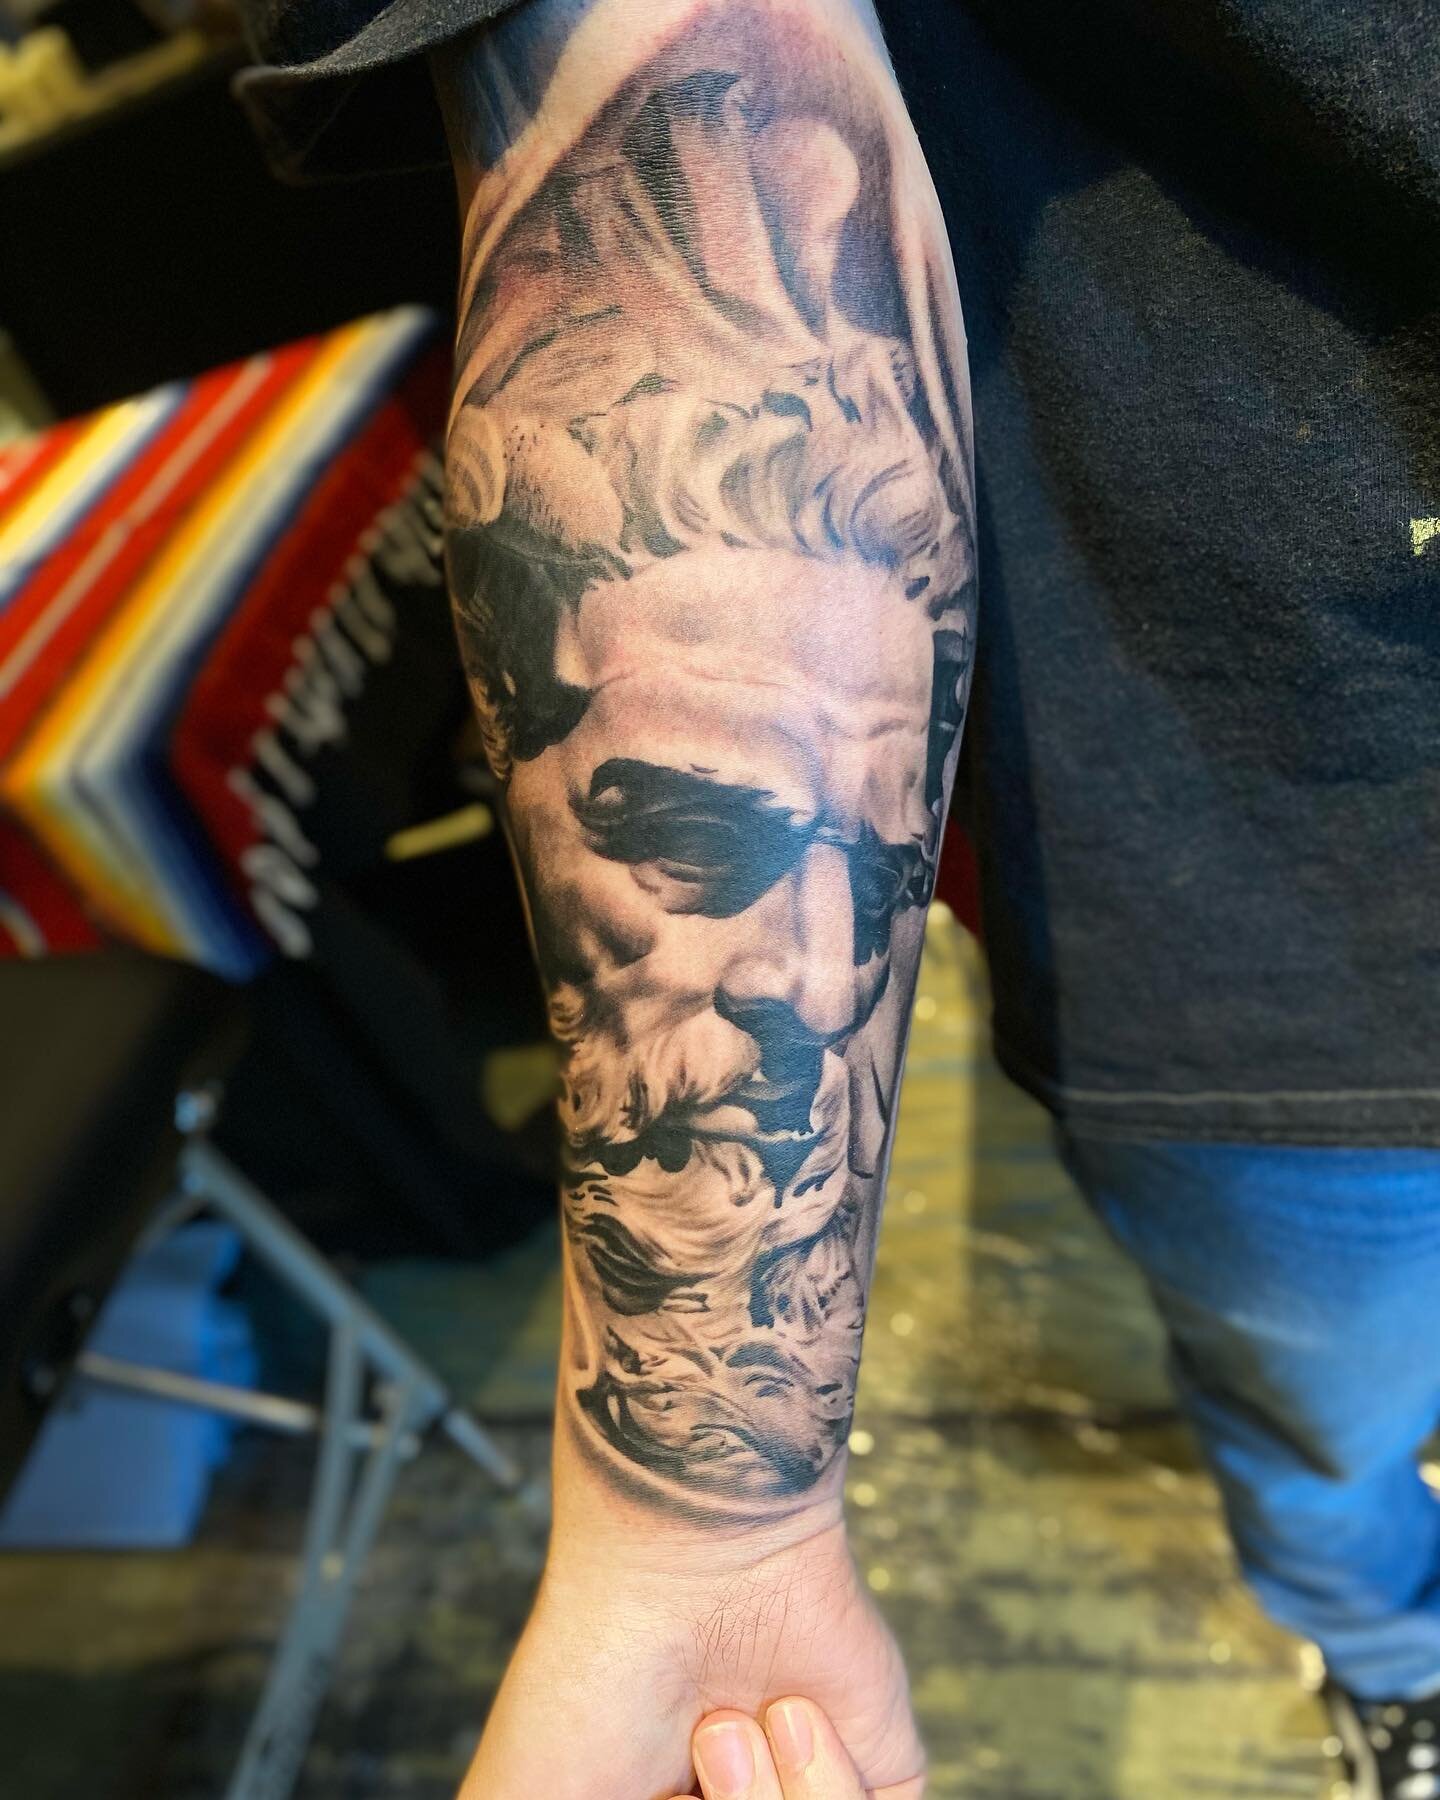 Did this one at the Motorcity Tattoo Expo this past weekend! Had a blast! Seen a lot of great artist. Looking to do more large scale sessions. If you have a idea or want something unique let me know. #motorcitytattooexpo #detroit #greek #statue #eter